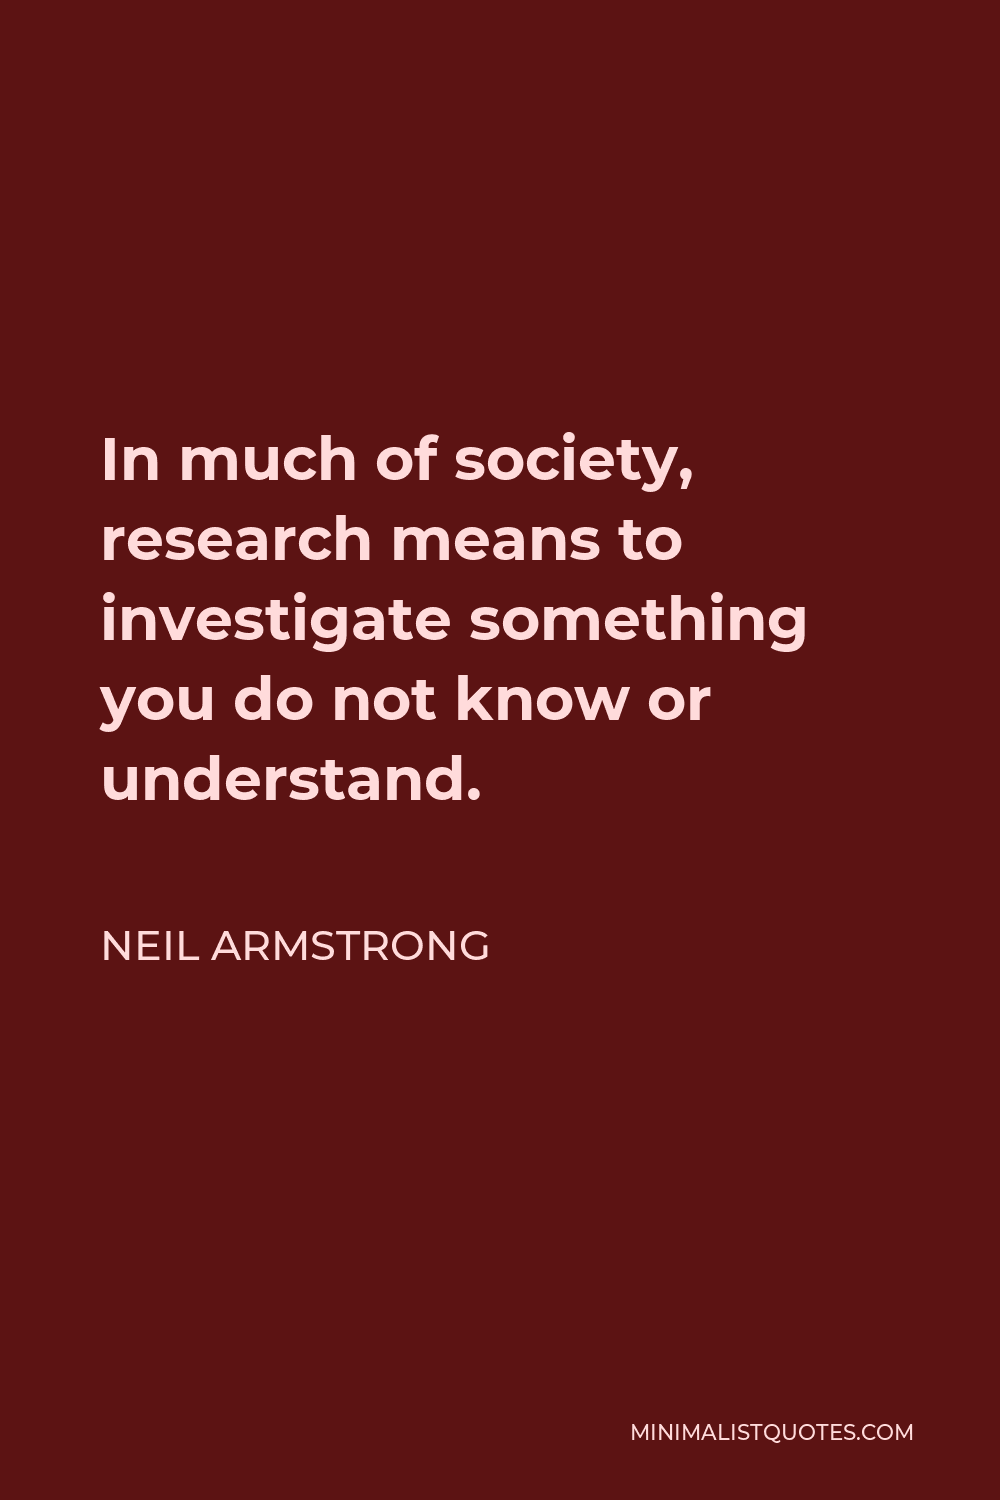 Neil Armstrong Quote - In much of society, research means to investigate something you do not know or understand.